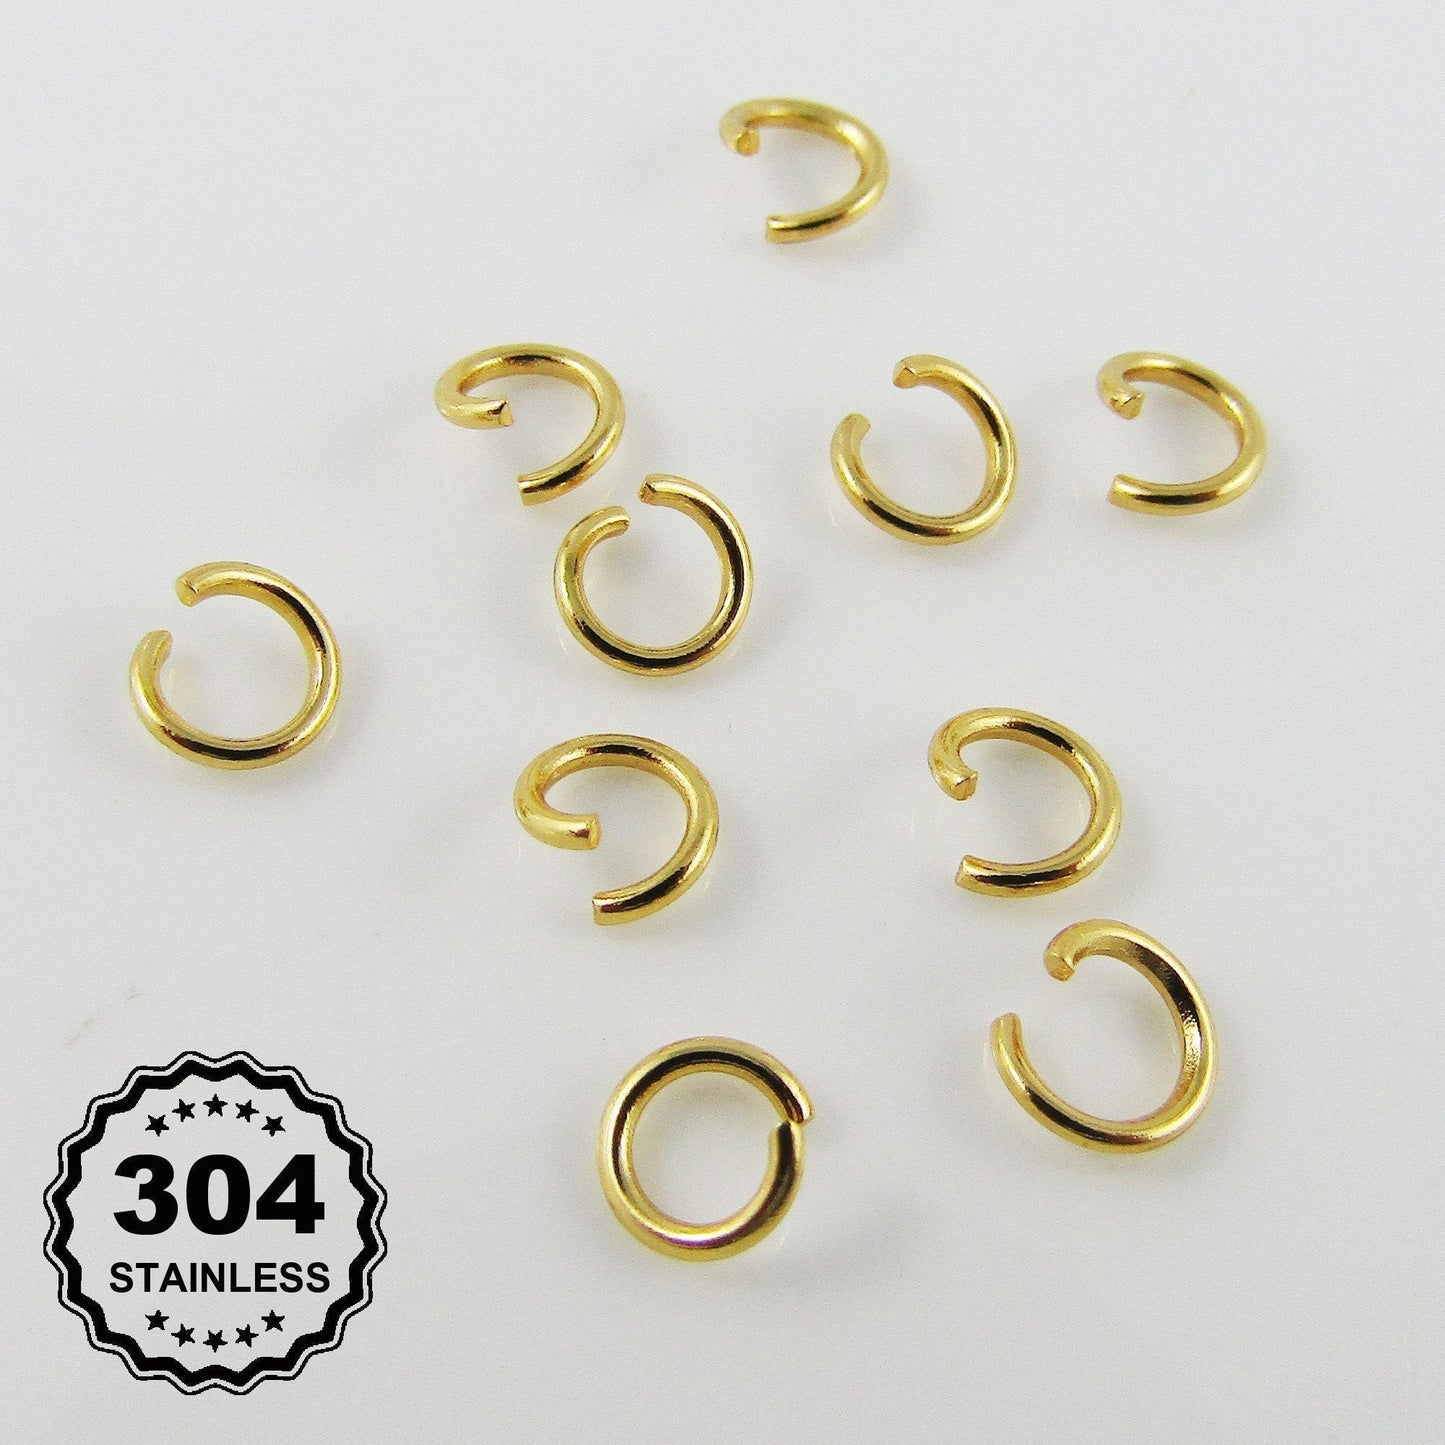 20 pcs Bulk Gold Plated Stainless Steel 5mm Open Jump Rings Findings Craft